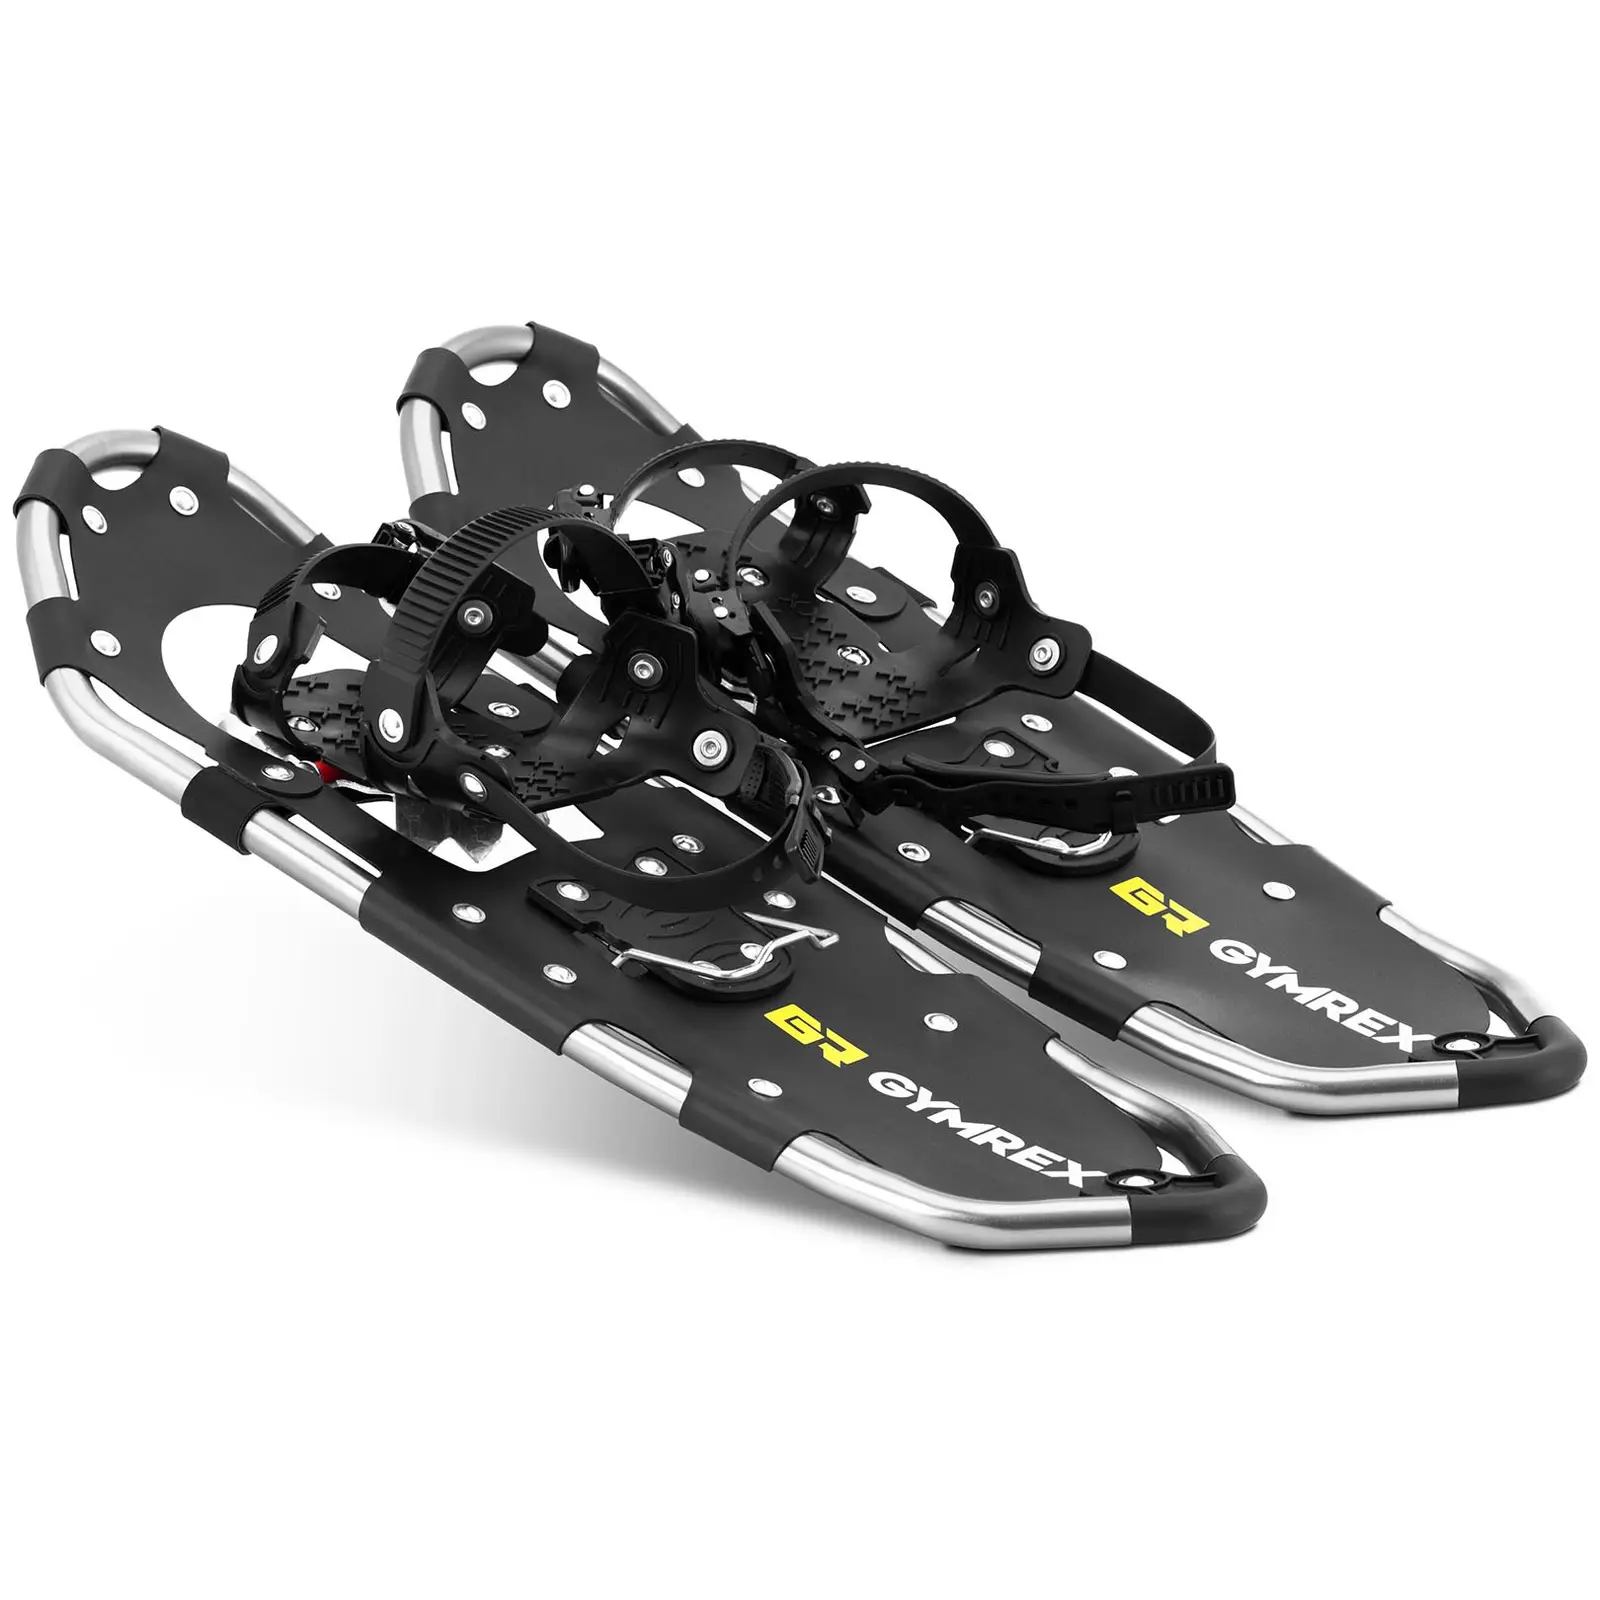 Snow shoes - up to 80 kg - foot lengths: 27 - 37 cm - aluminium / steel / HDPE